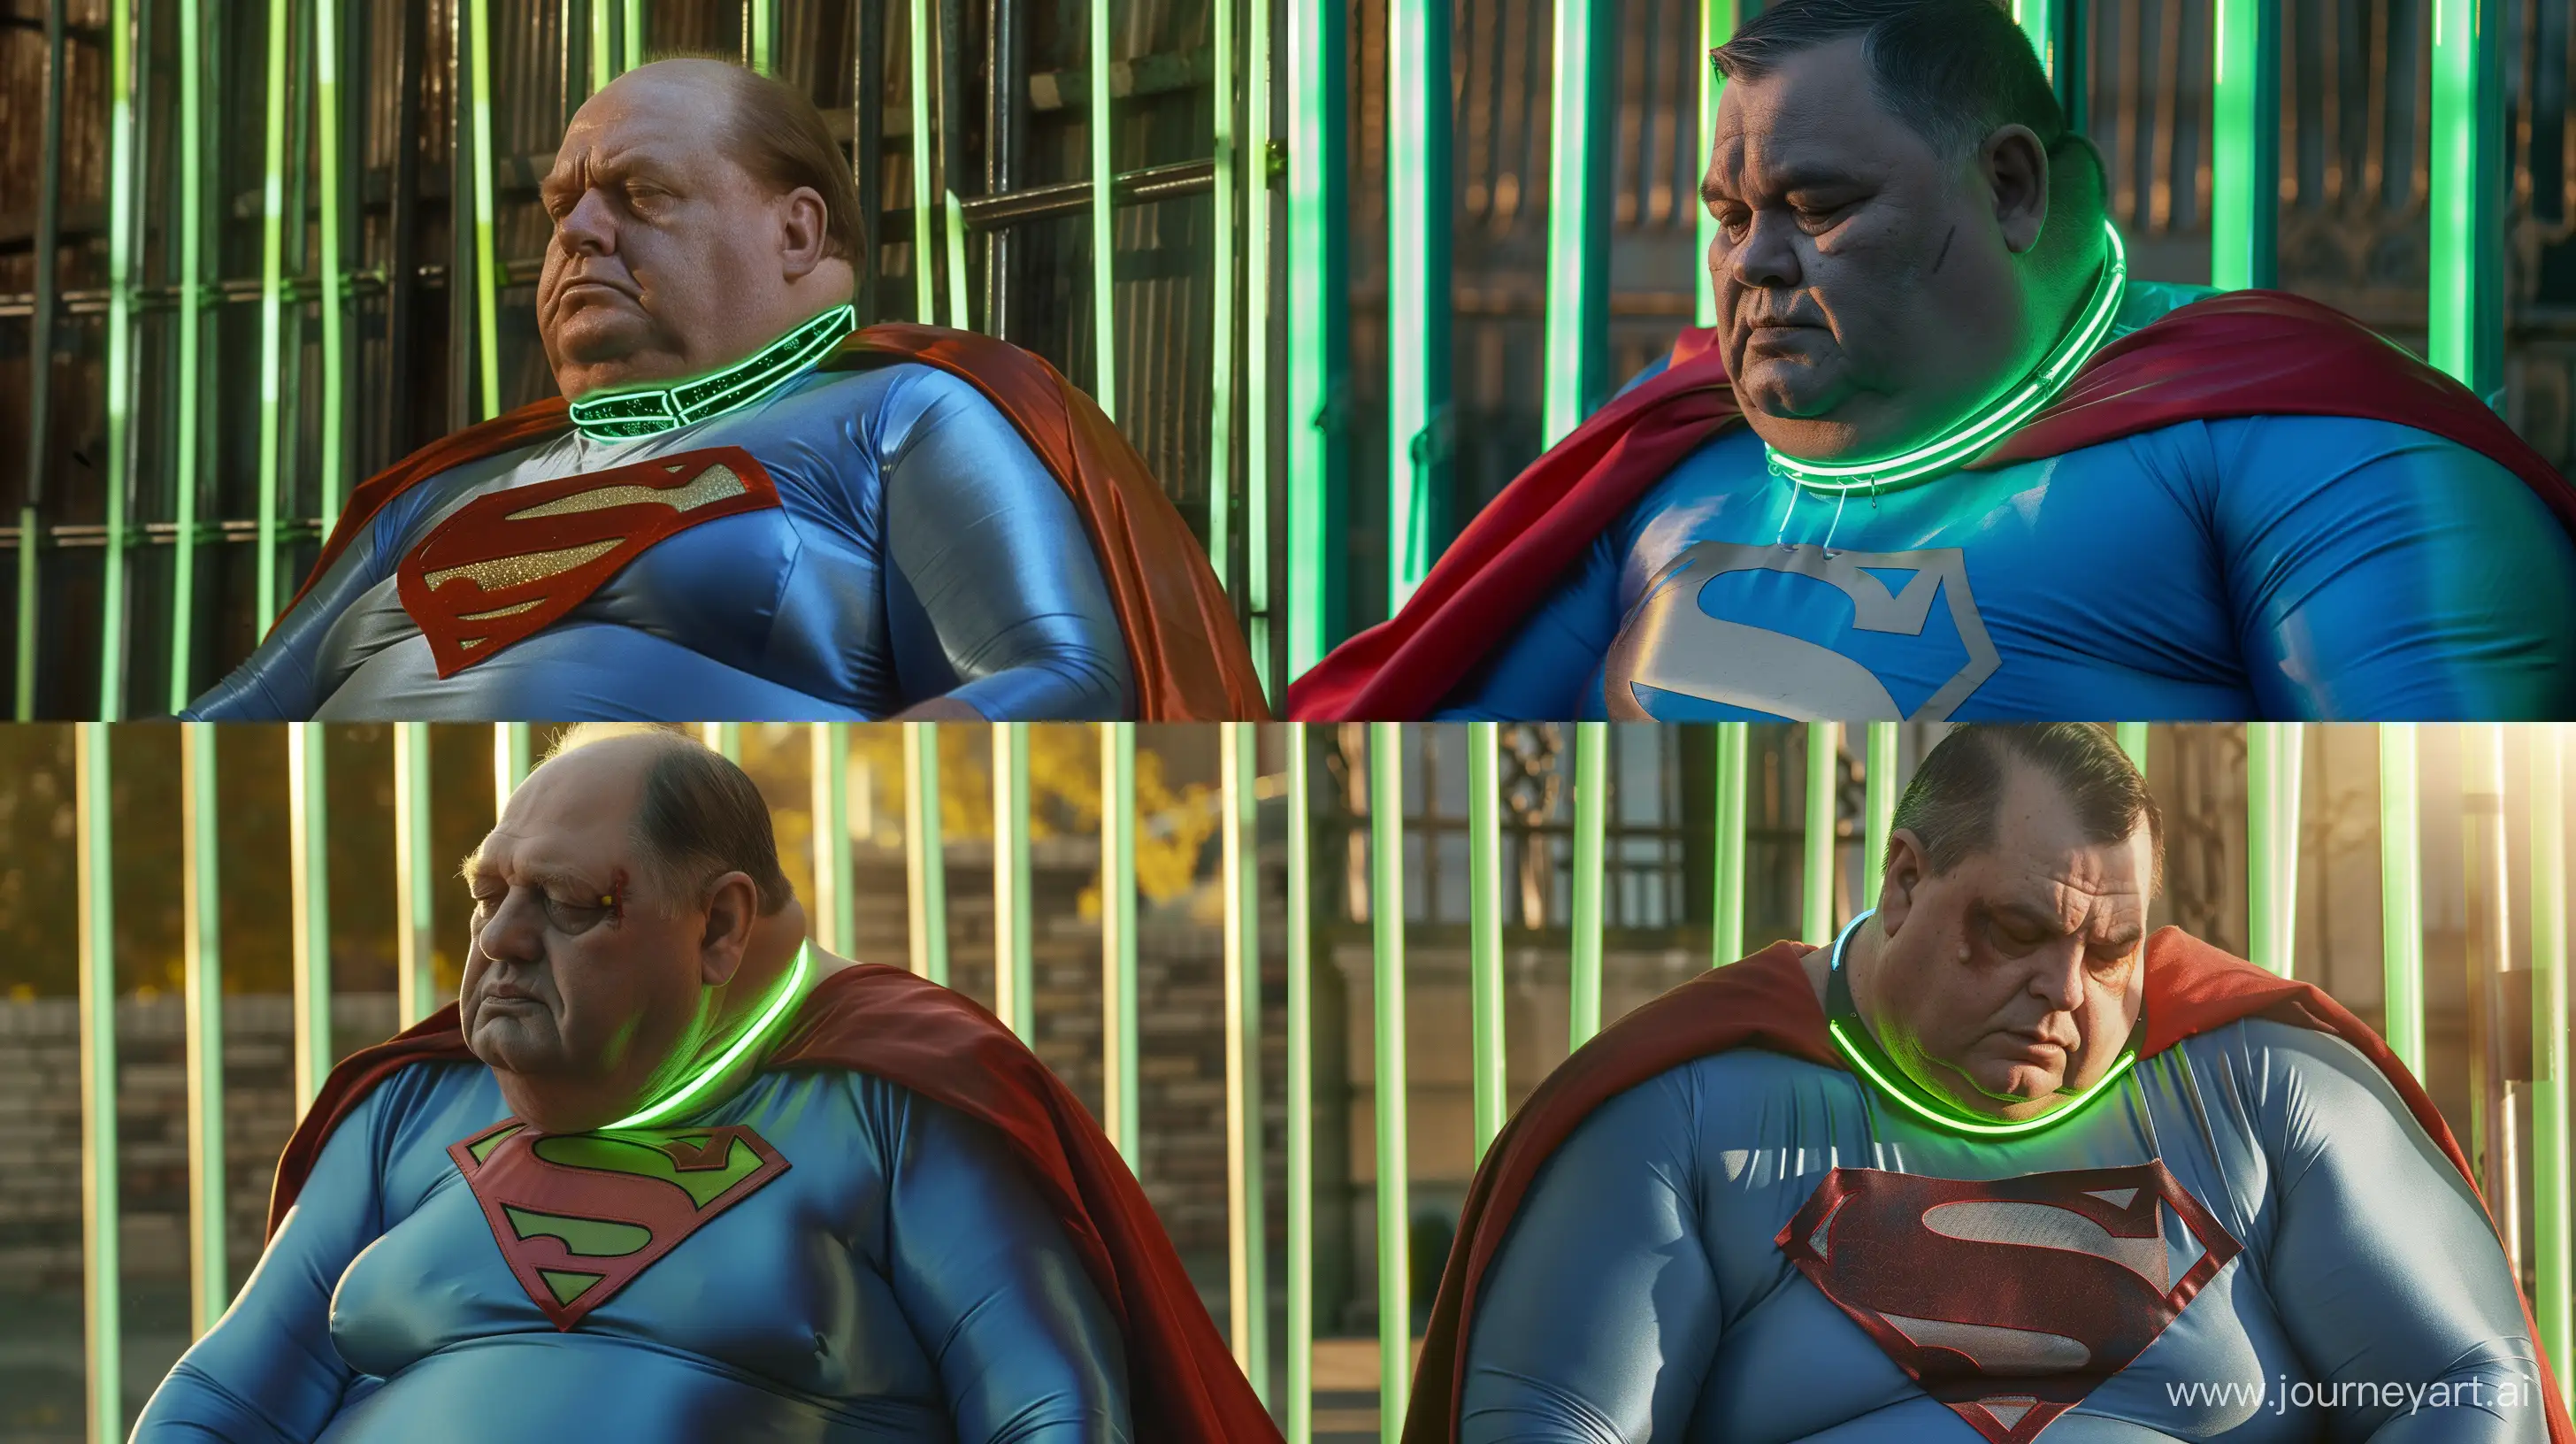 Elderly-Superman-Enjoys-Sunny-Day-Outside-with-Neon-Accents